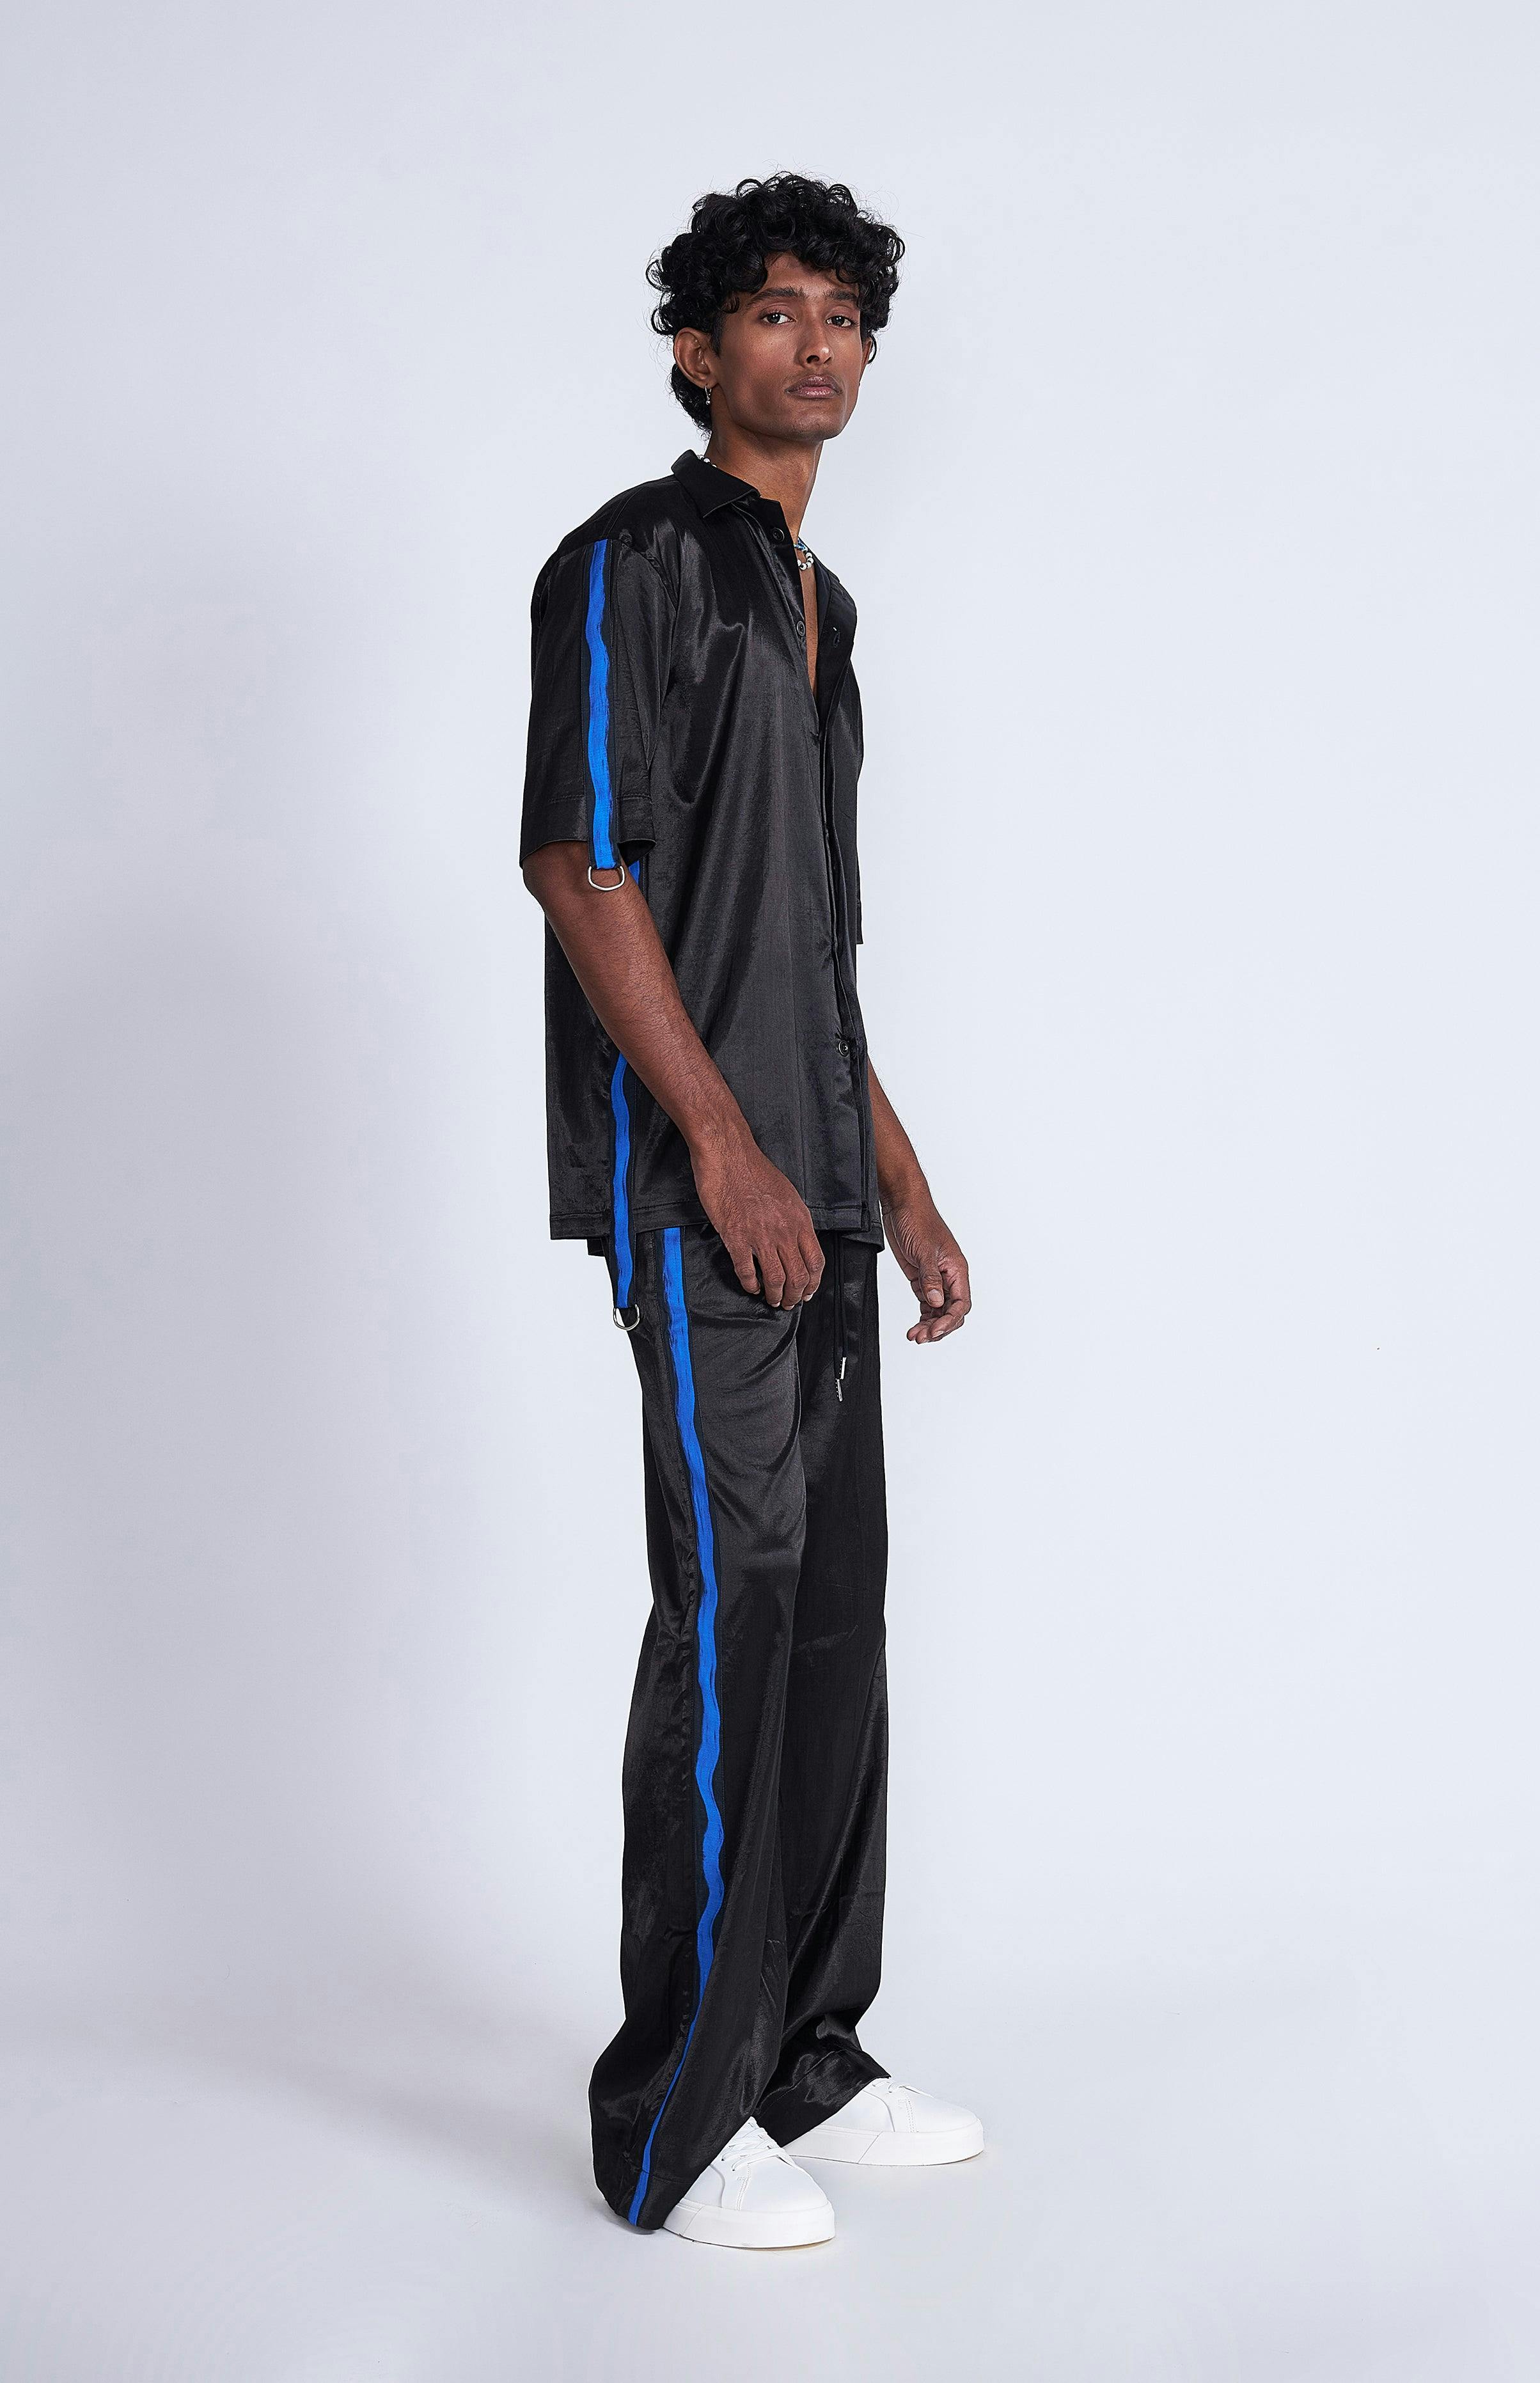 Kuro Border Trousers, a product by Advait India